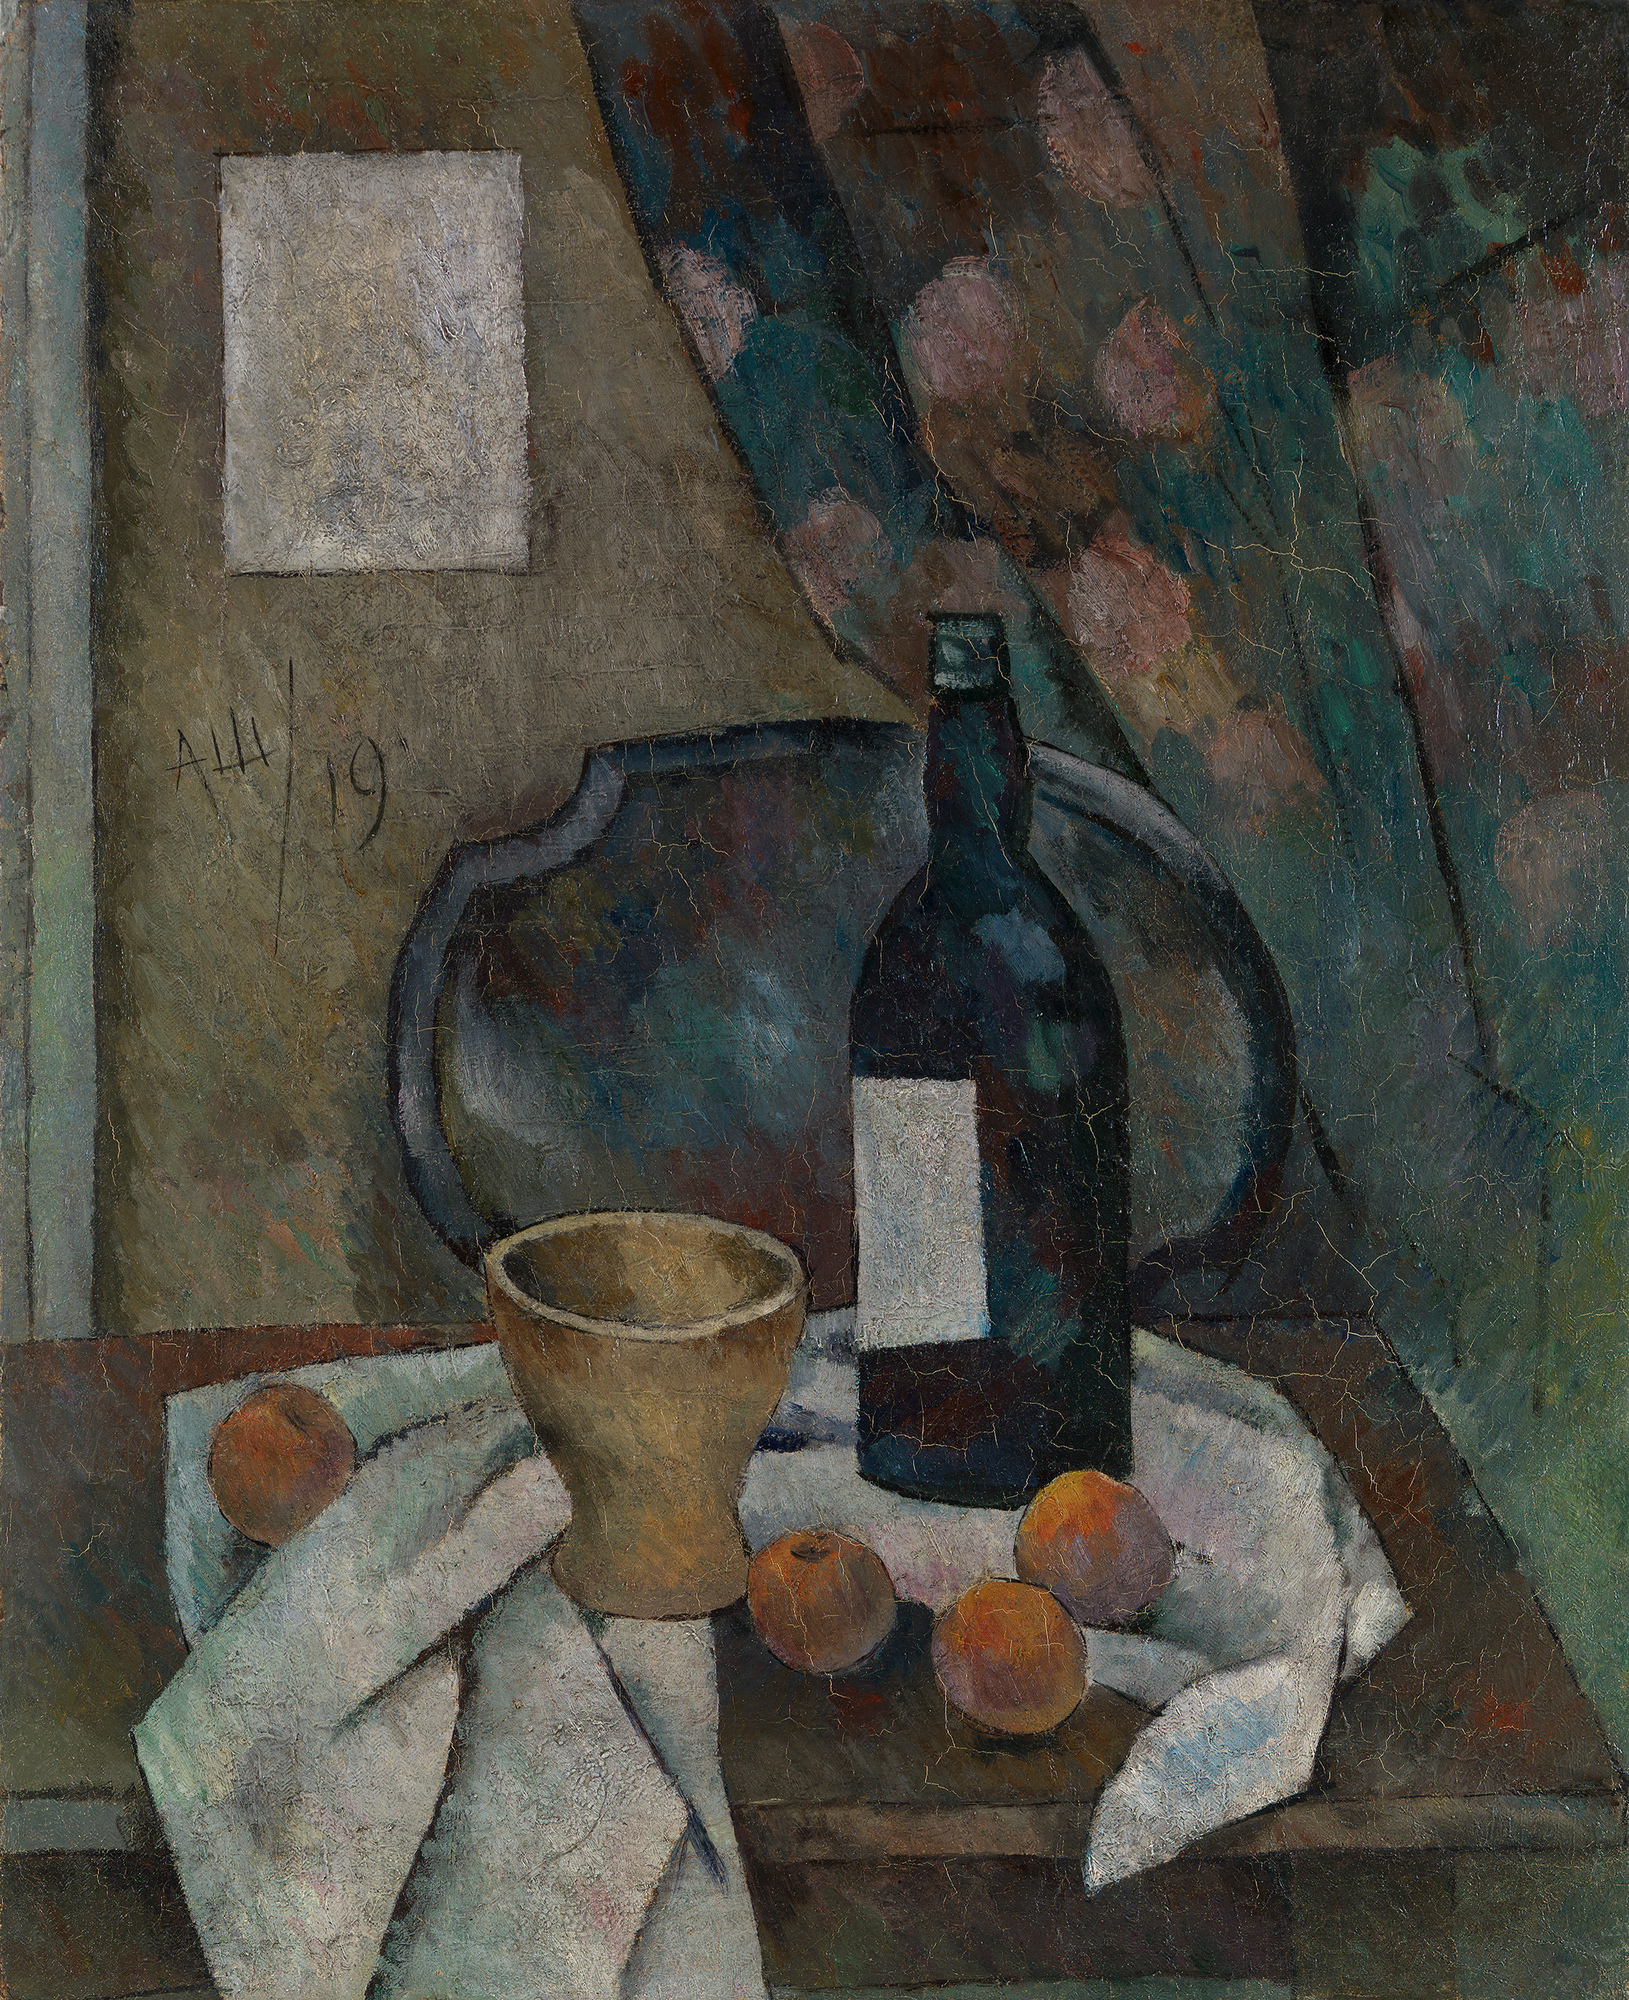 Still Life with Wine Bottle and Tray